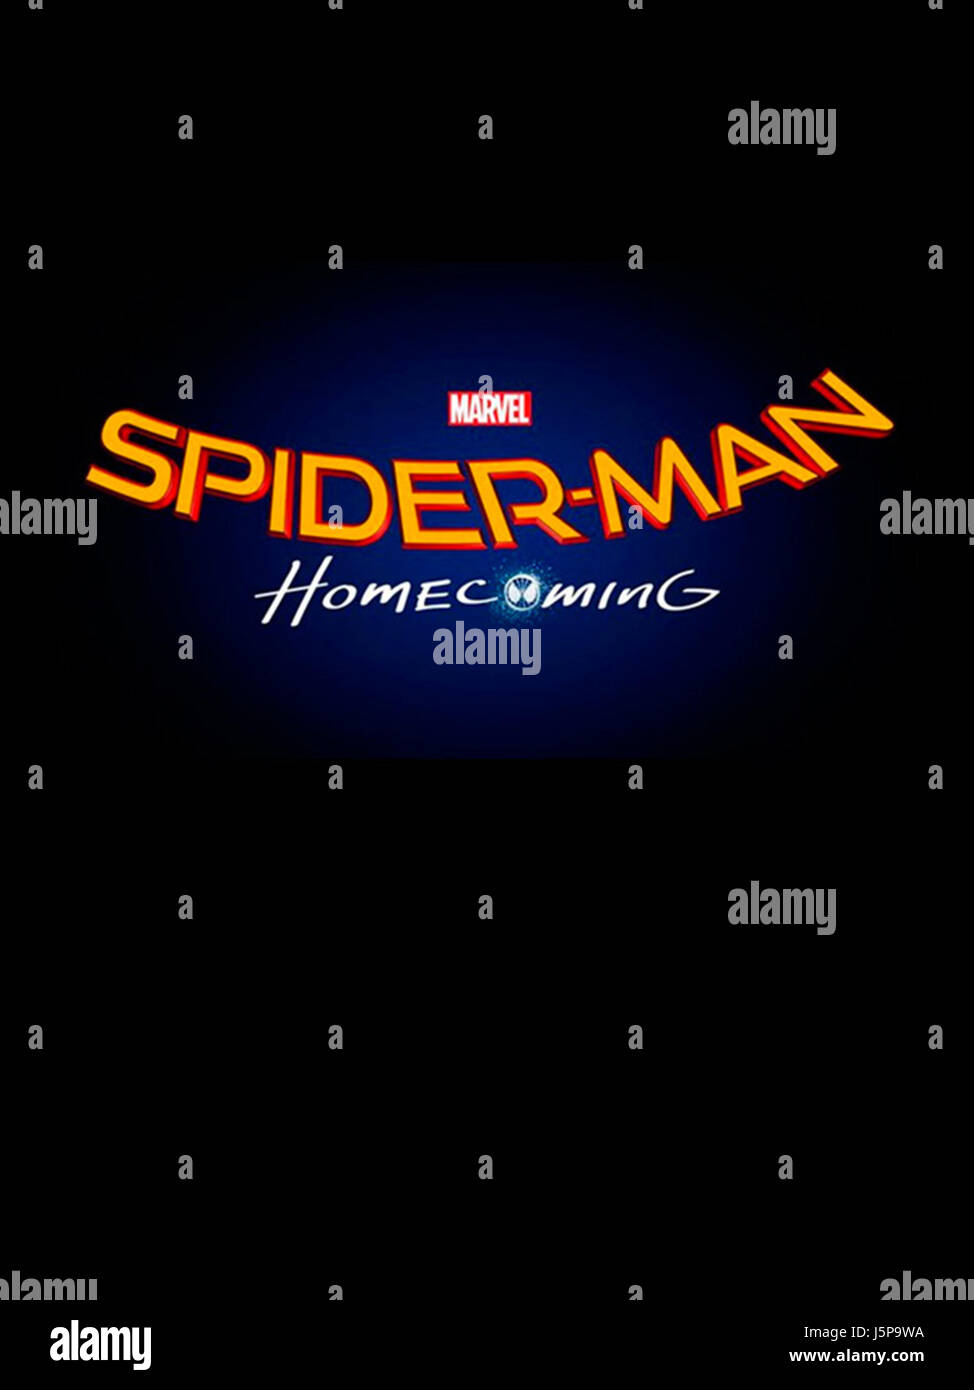 SPIDER-MAN : Homecoming (2017) JON WATTS (DIR) Marvel Studios/Columbia Pictures/COLLECTION MOVIESTORE LTD Banque D'Images